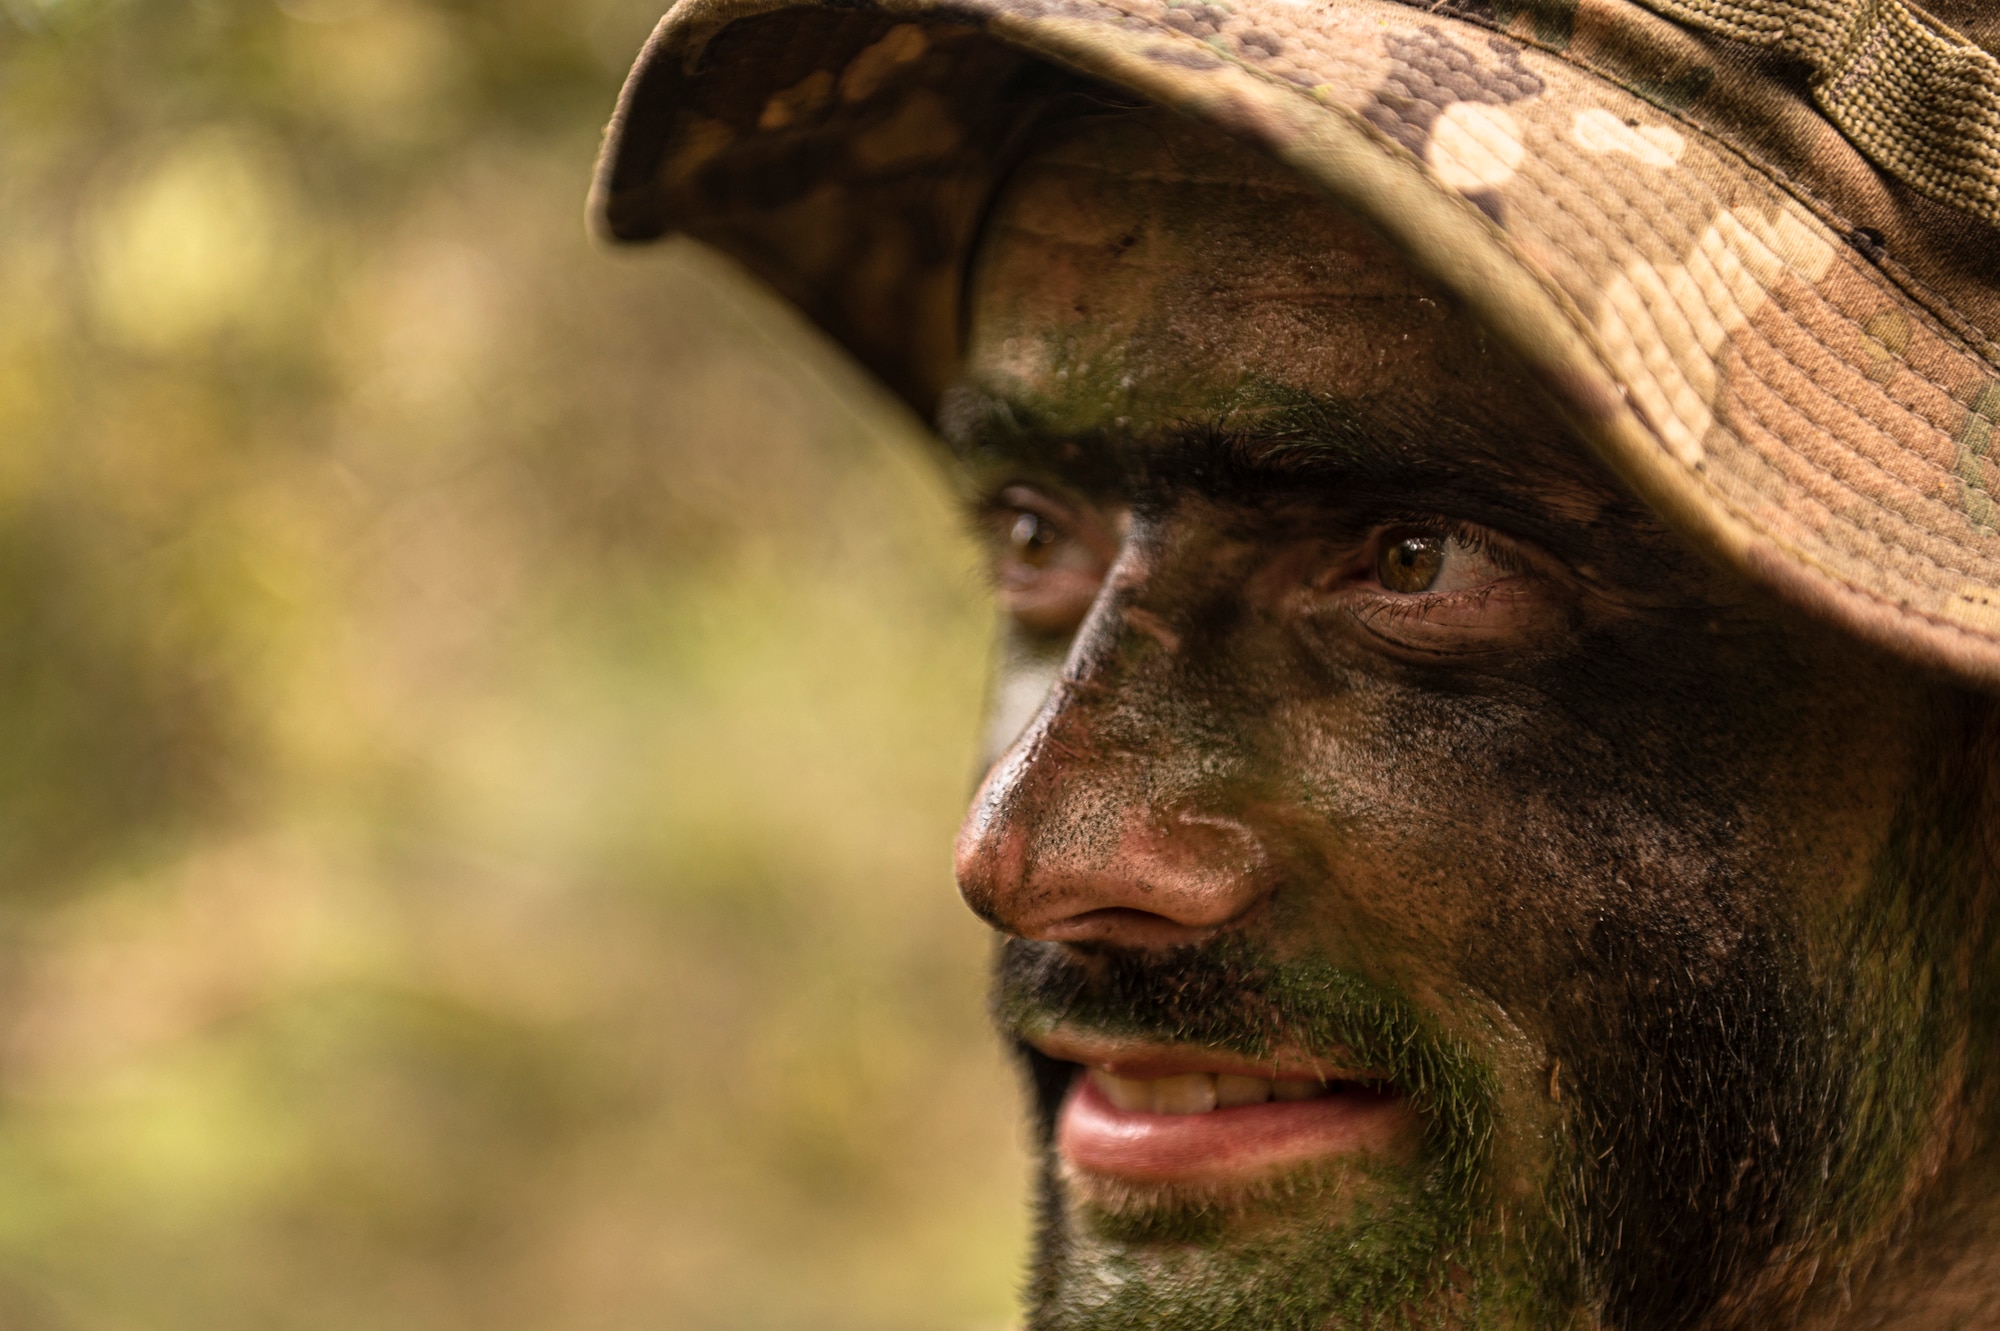 Photo of Airman in the jungle